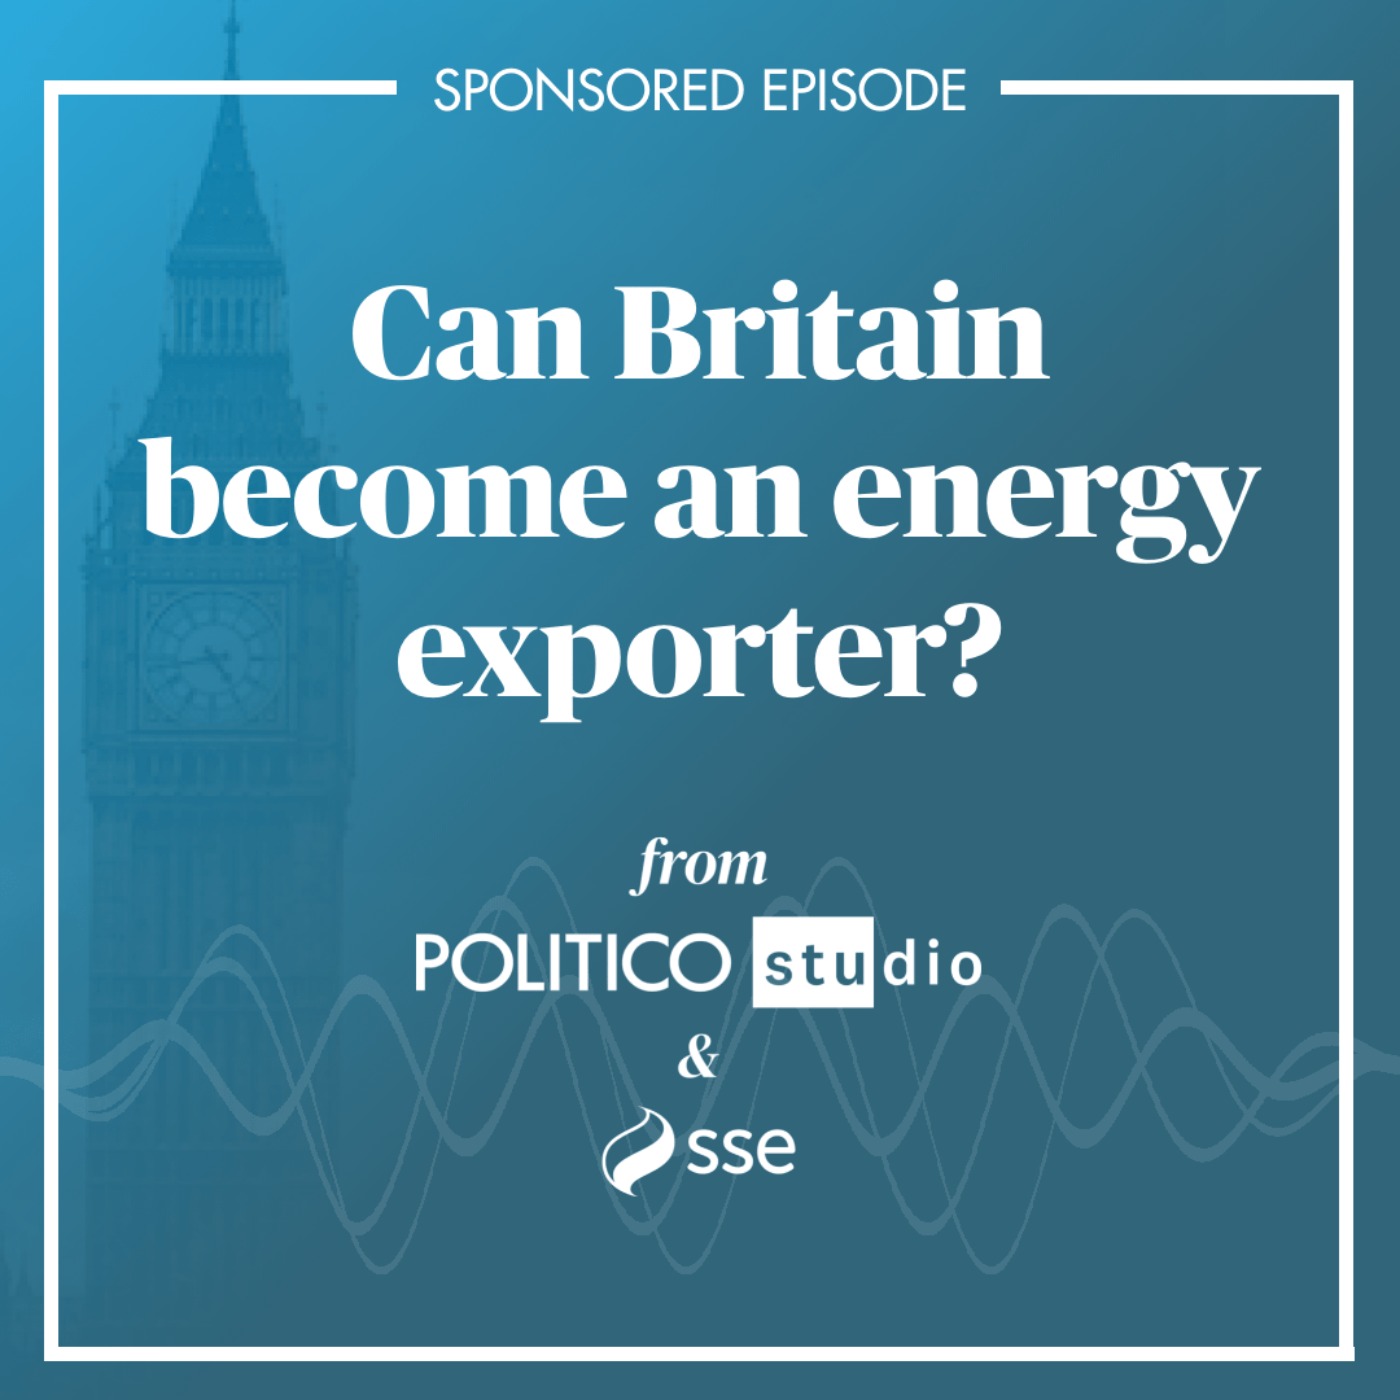 SPONSORED CONTENT: Can Britain become an energy exporter?